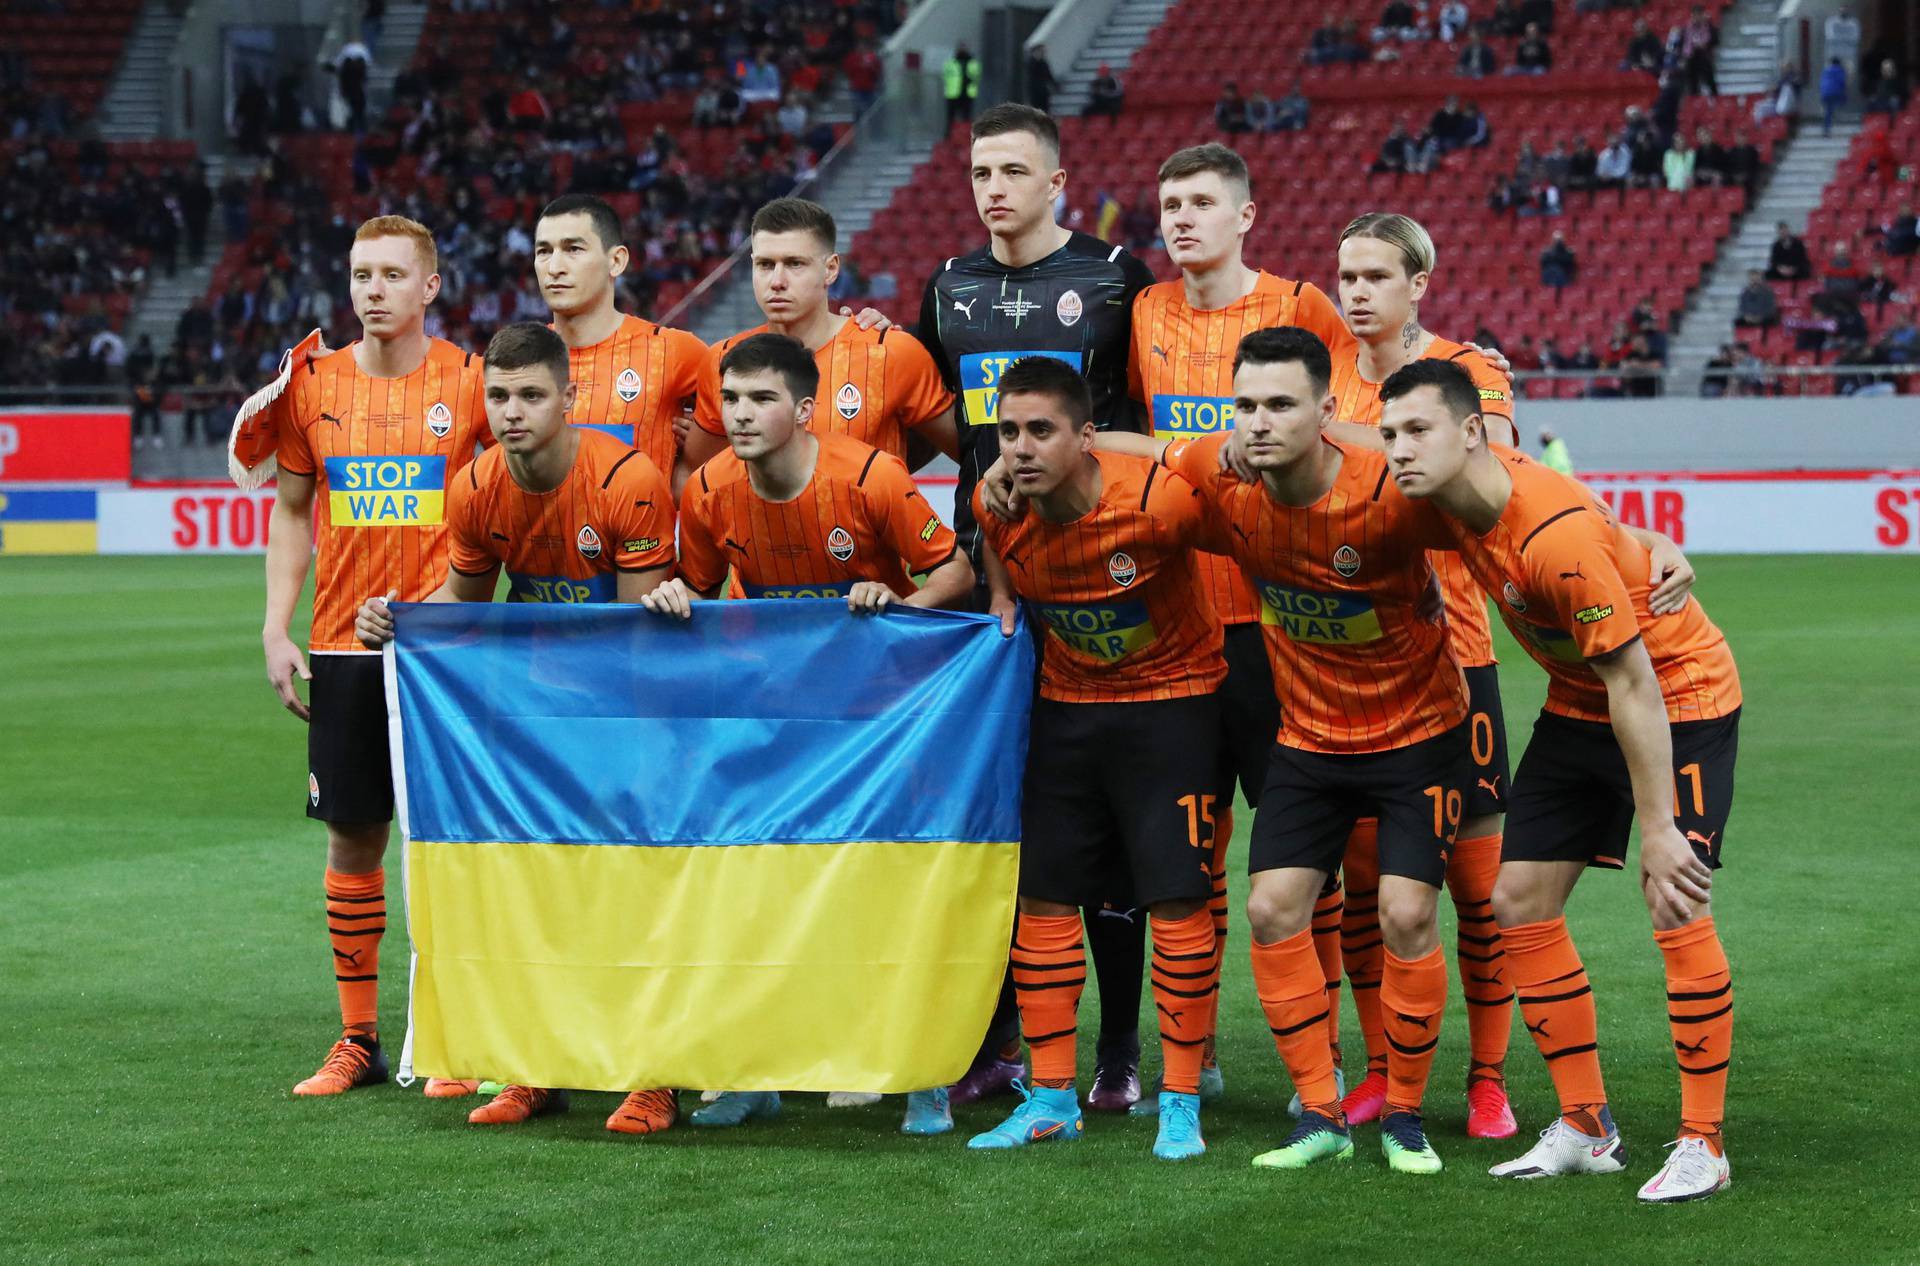 Friendly - A match for peace and the end of war in Ukraine - Olympiacos v Shakhtar Donetsk